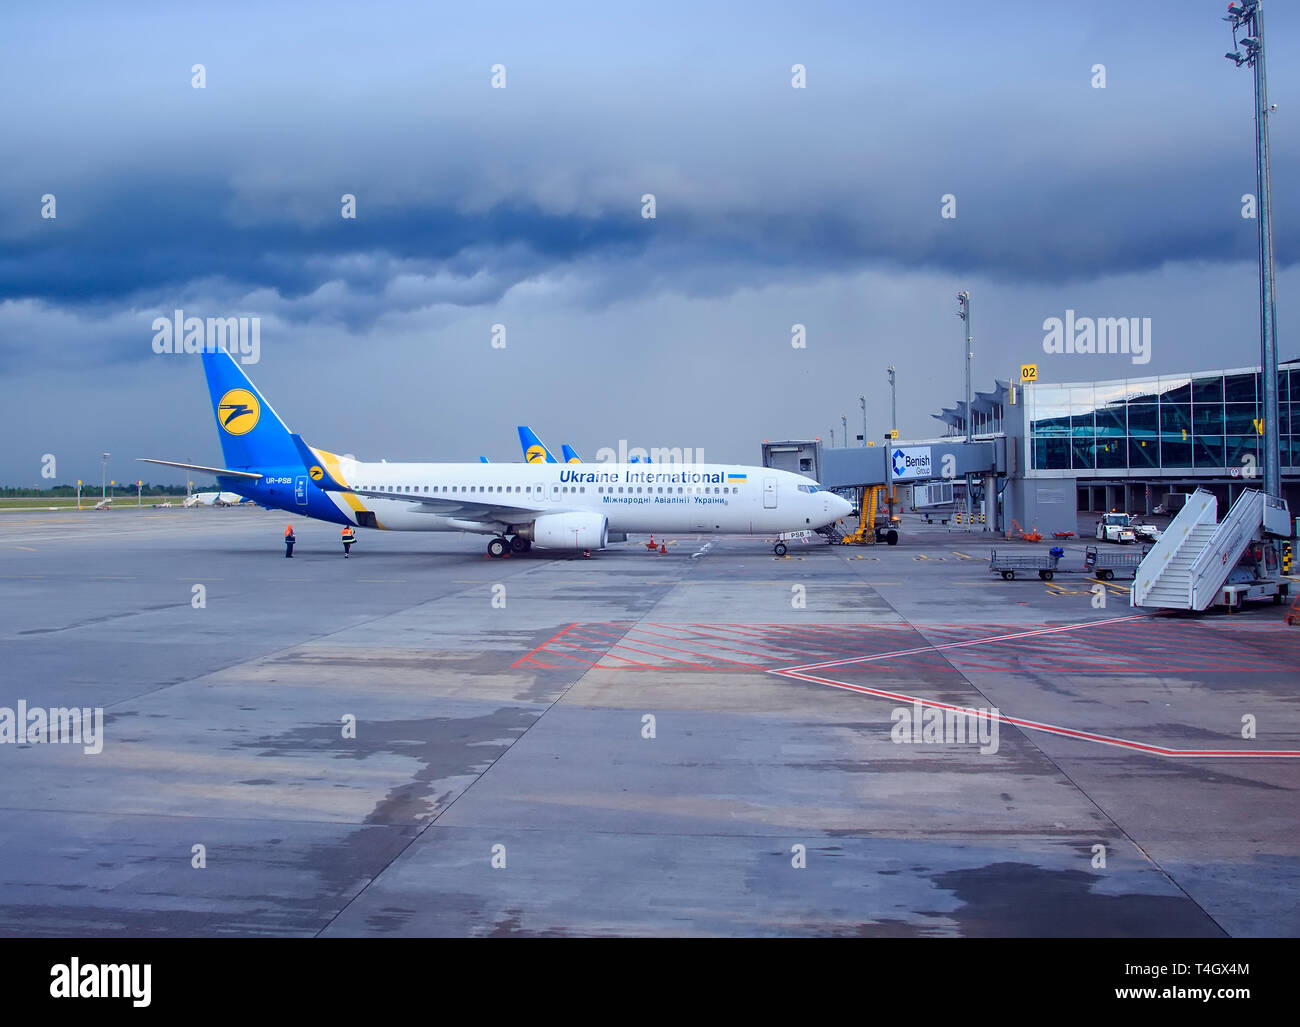 Kiev. Ukraine May 5, 2016: airline the plane is at the airport in cloudy weather. Borispol airport Stock Photo